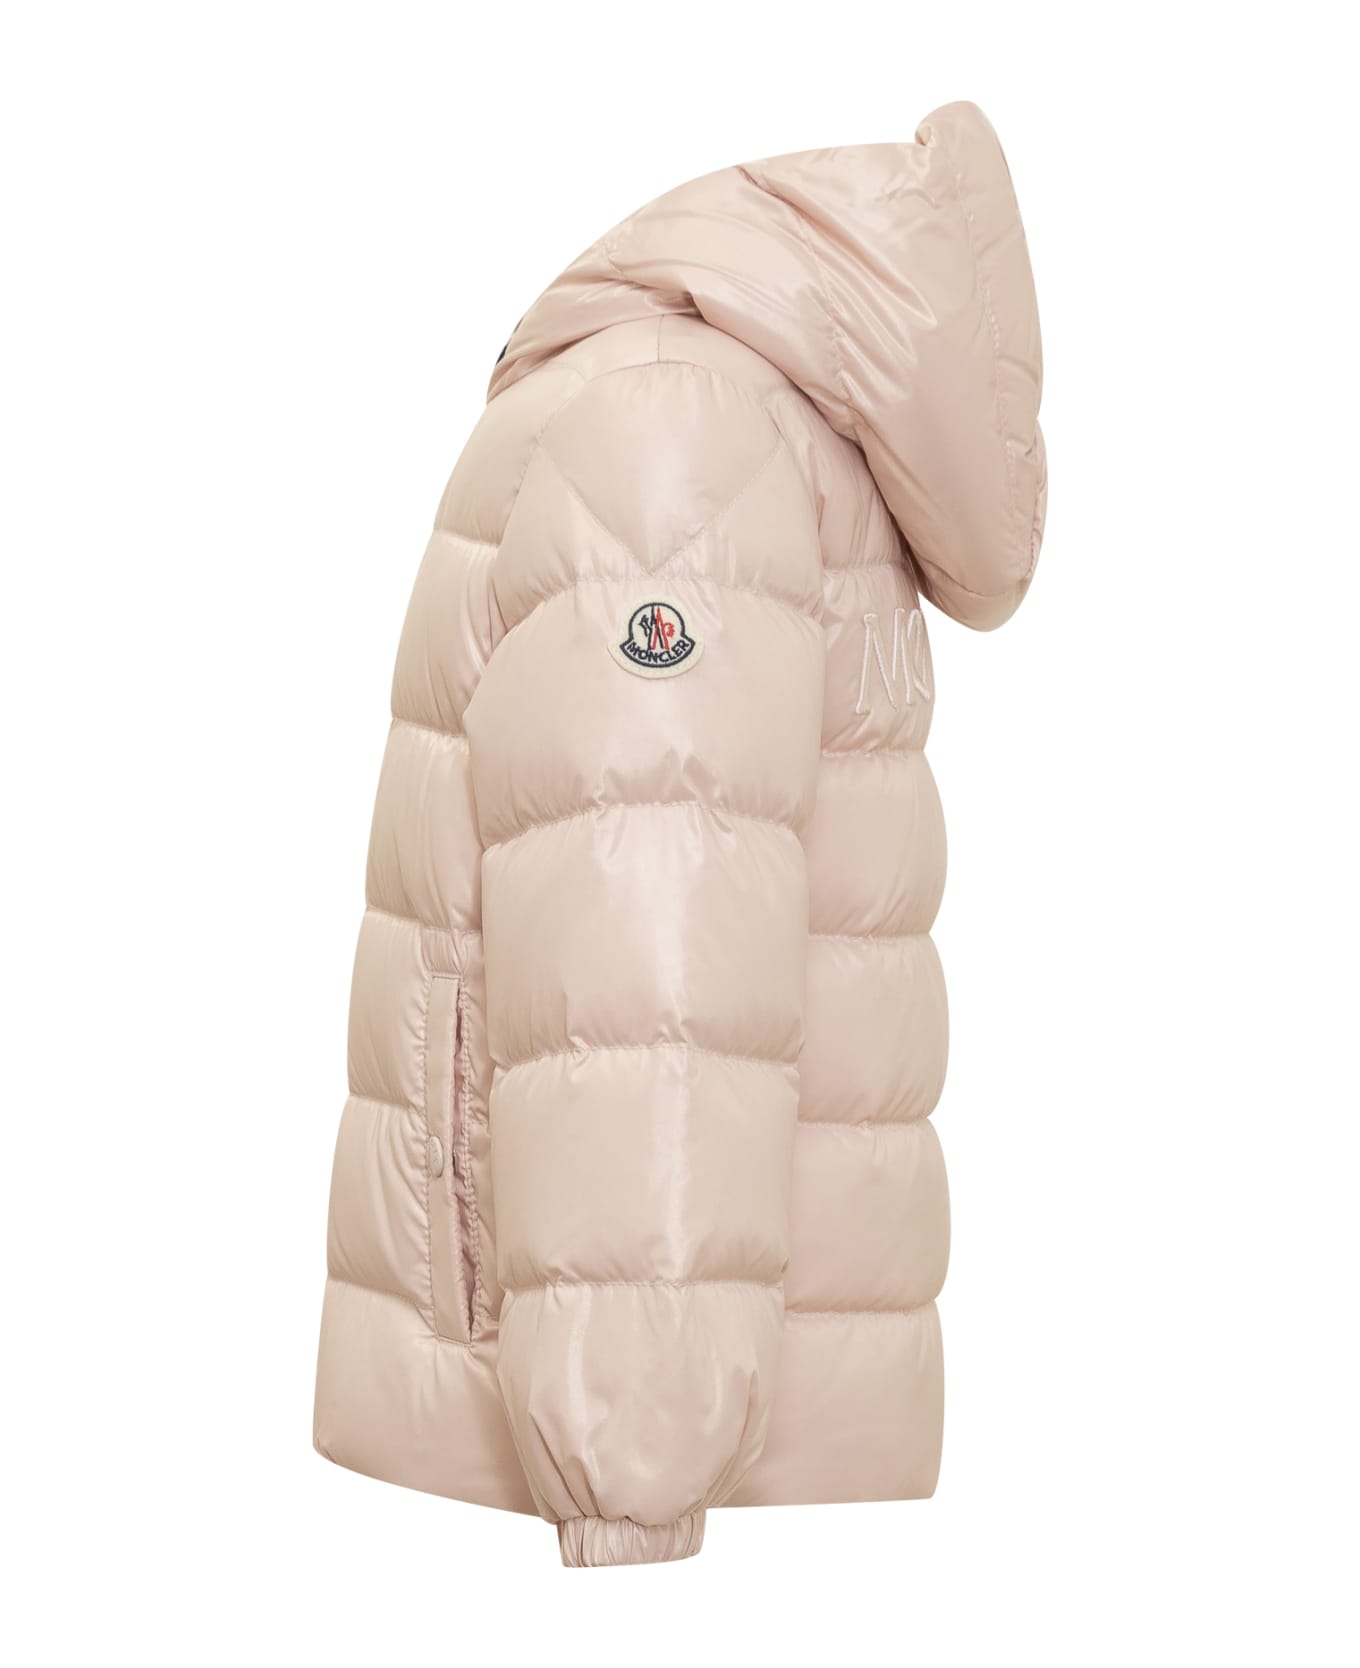 Moncler Anand Down Jacket - ROSA